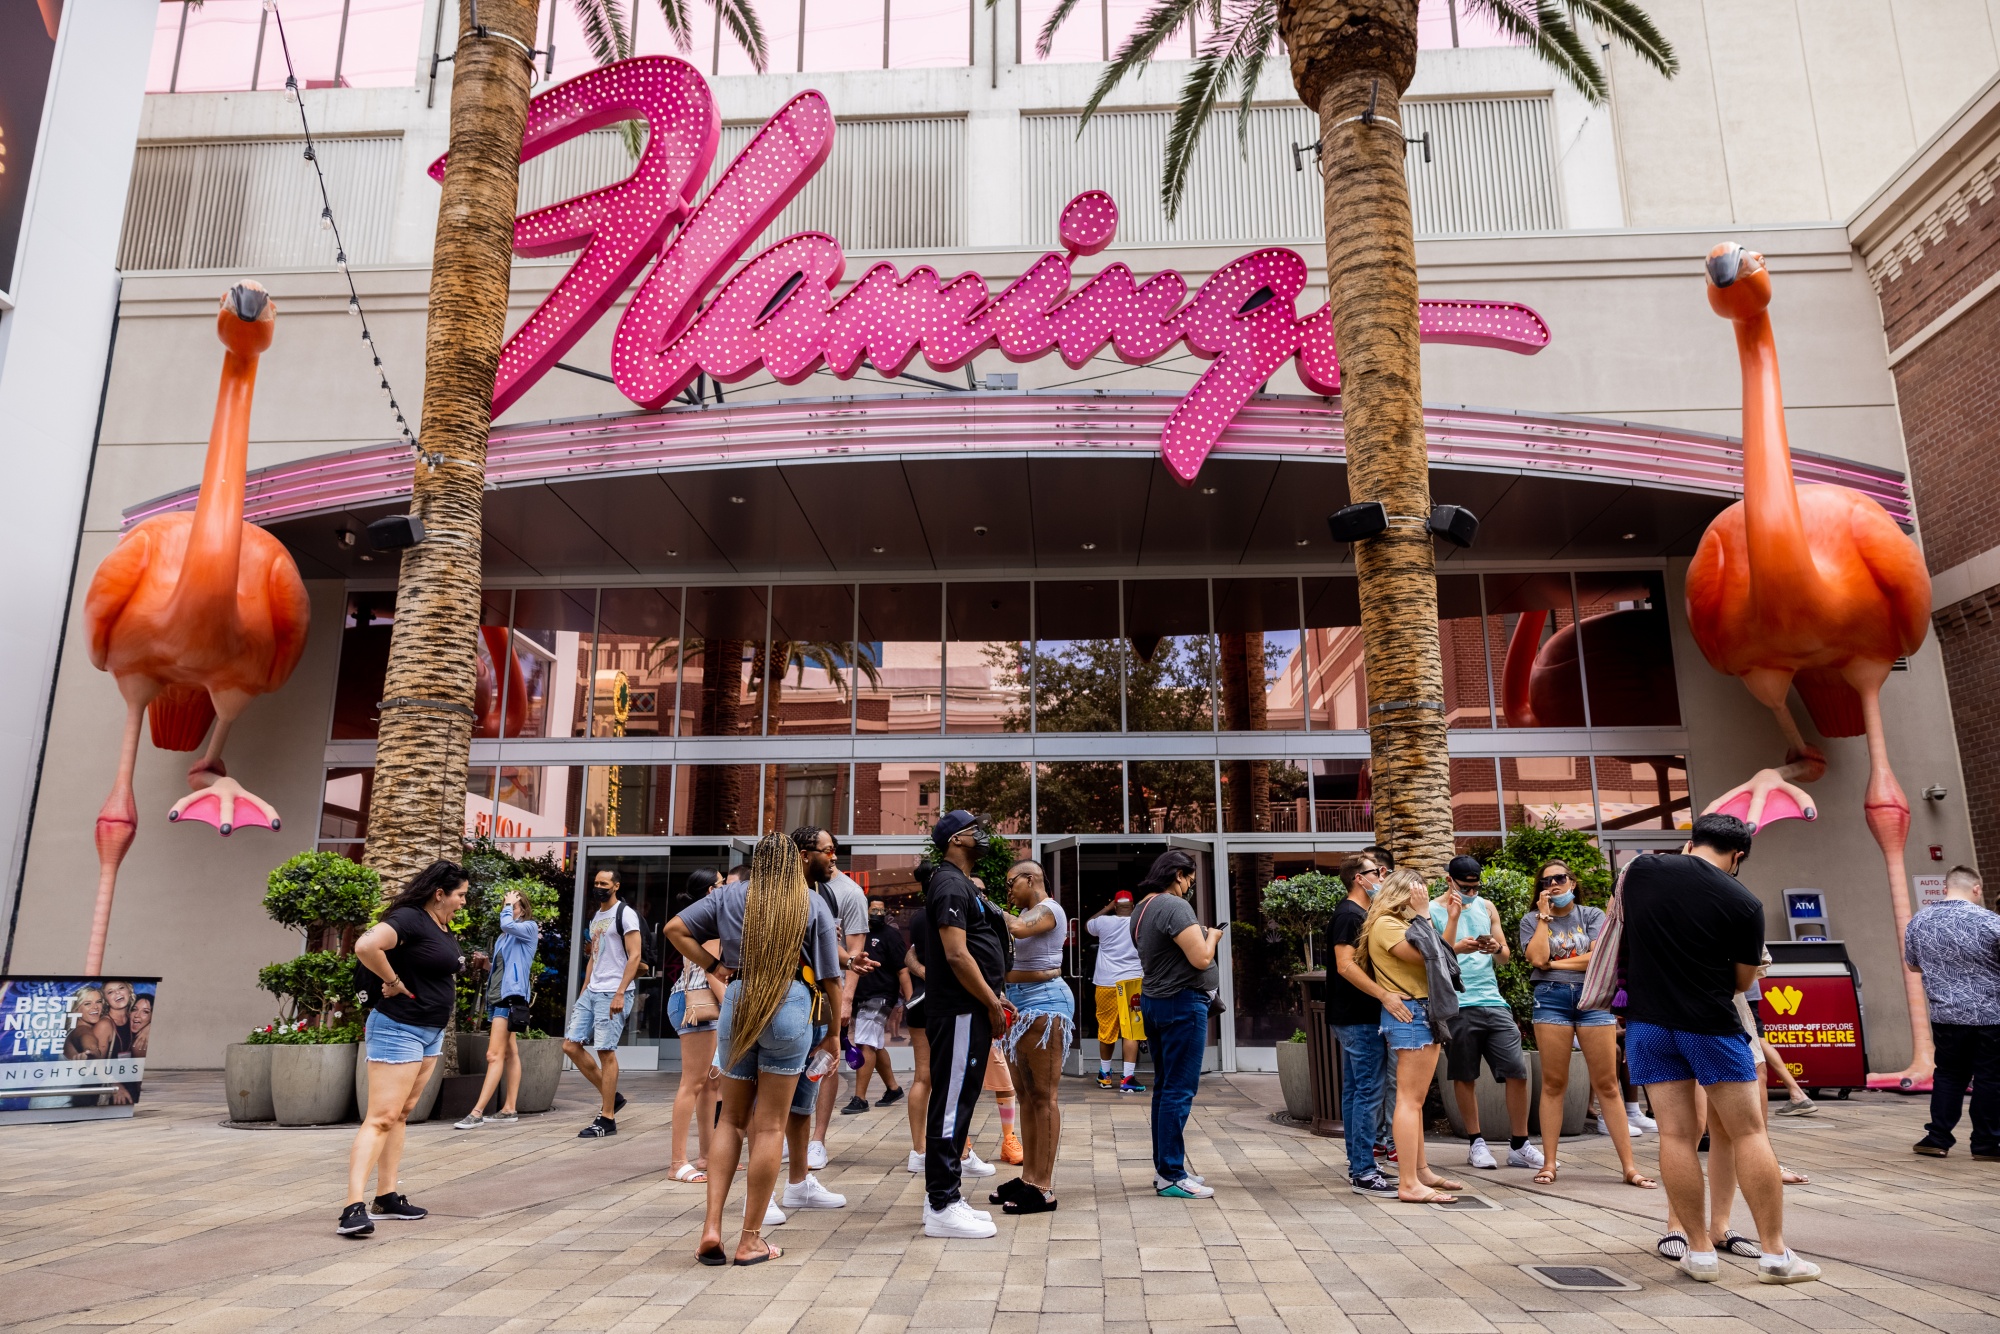 Front Entrance of Flamingo Las Vegas, Flamingo is a hotel and